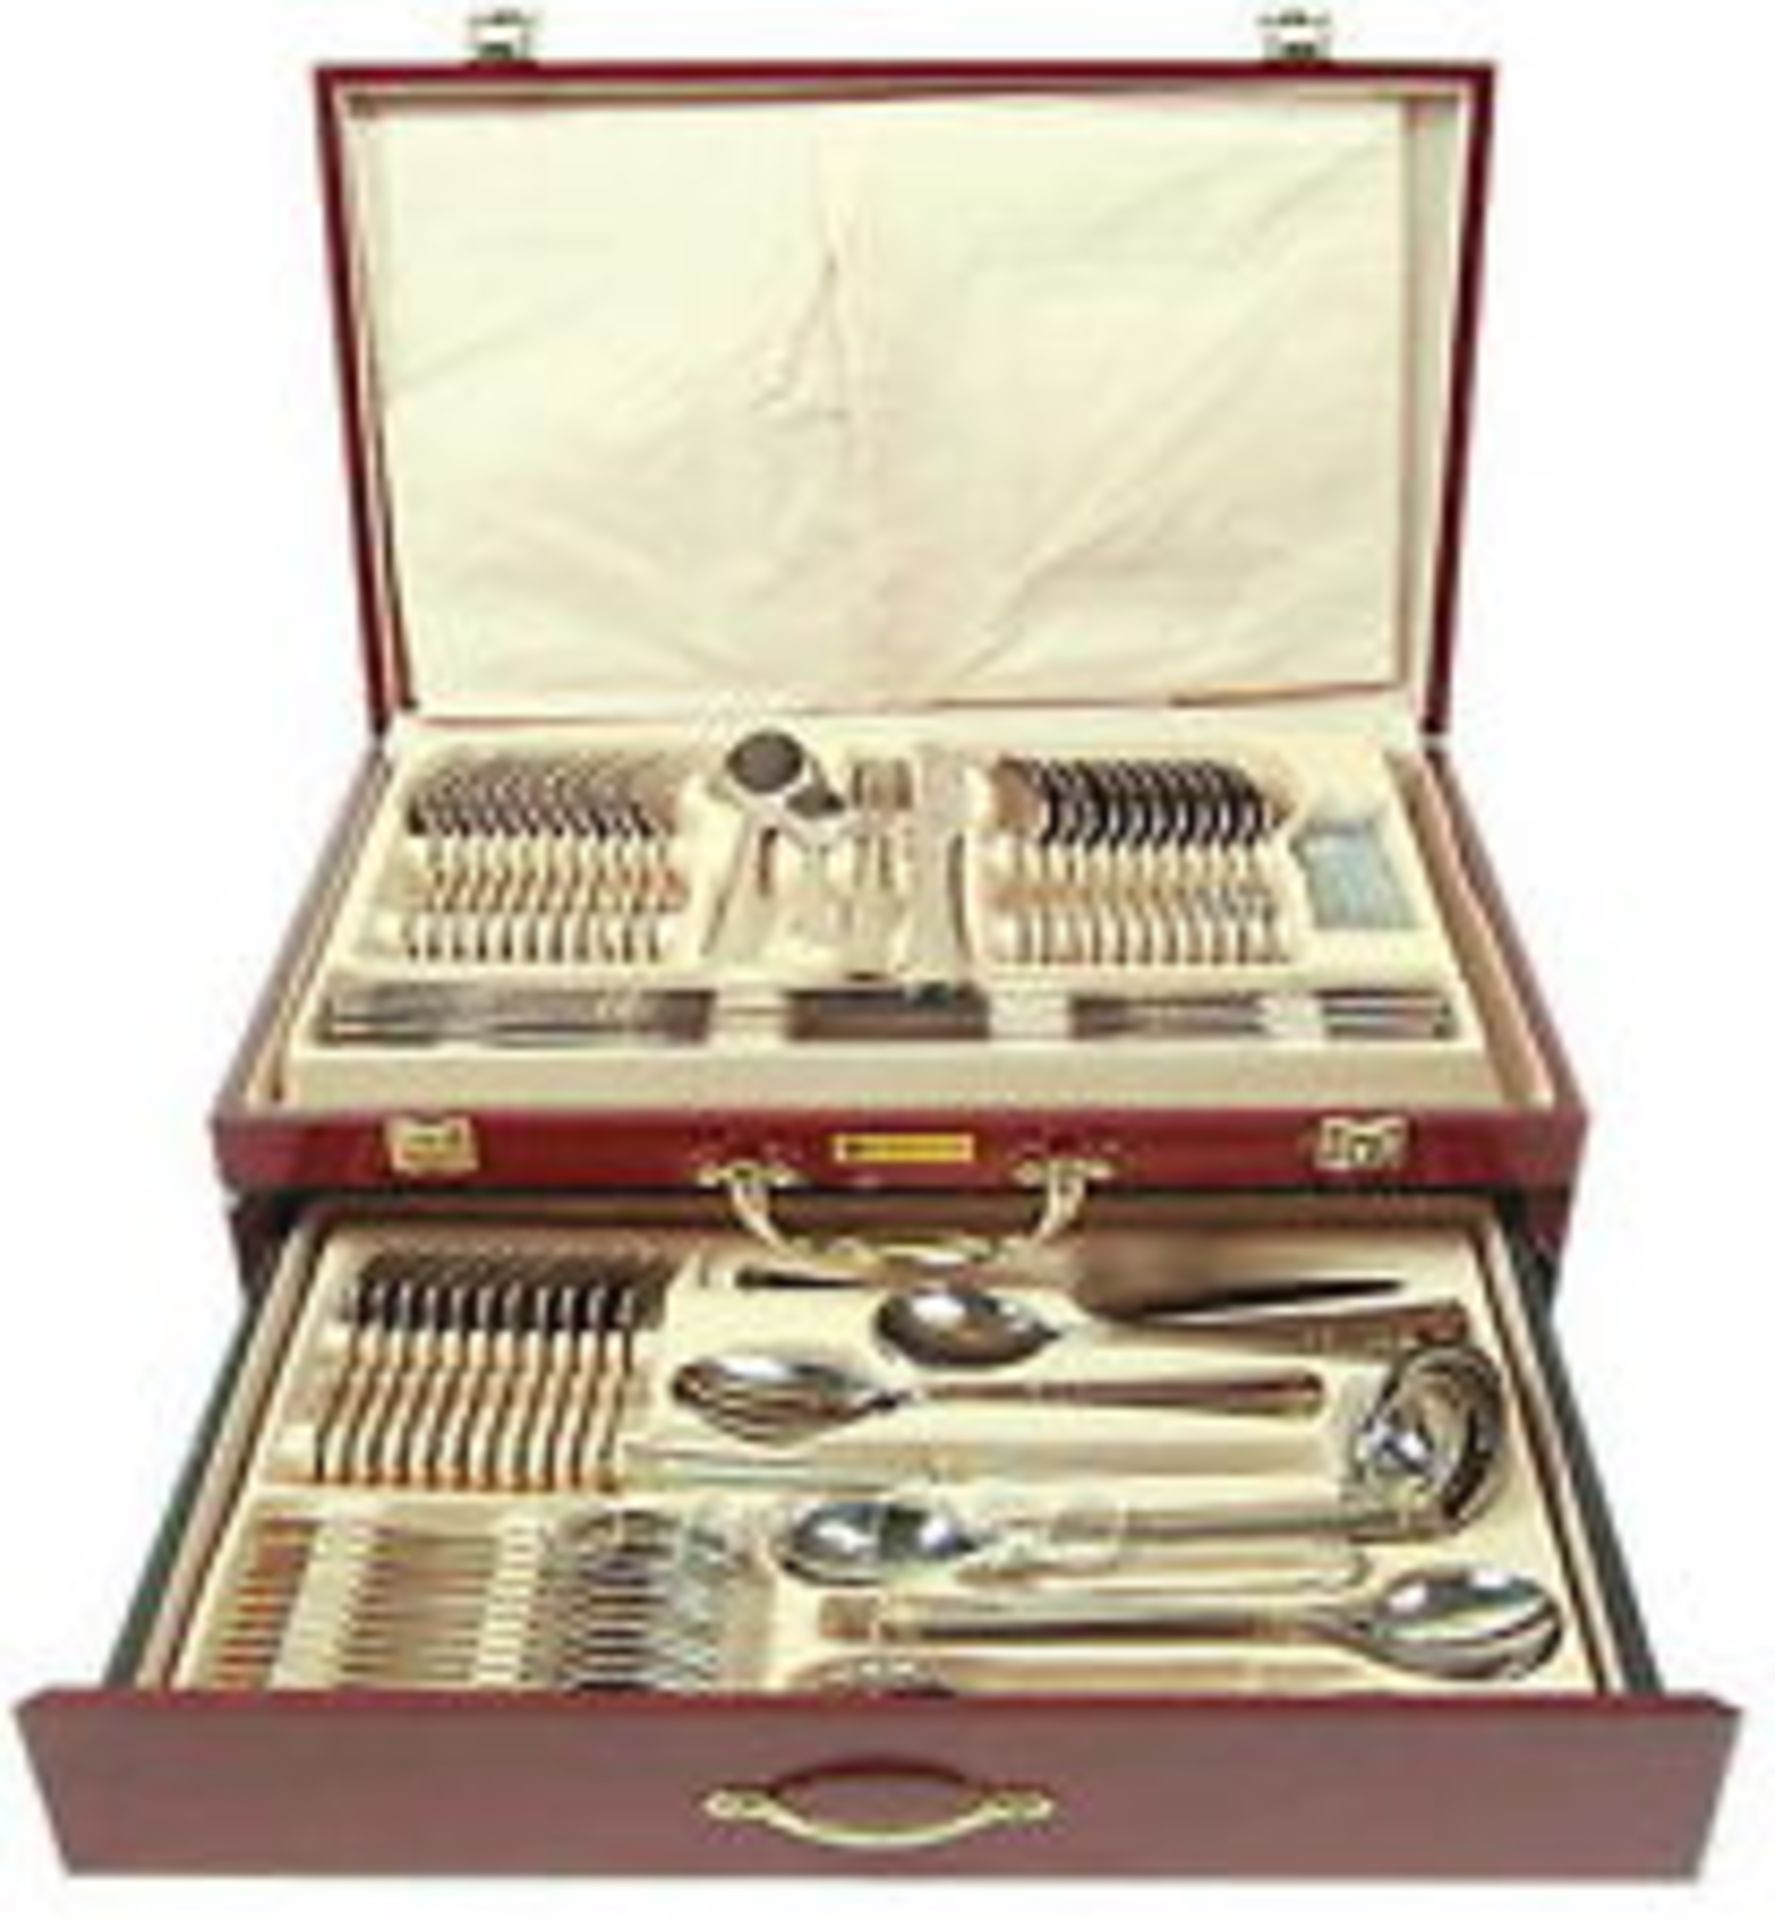 V 95pce Canteen Cutlery In Wooden Case Polished Stainless Steel Inc Ladles Etc RRP 675 Euros